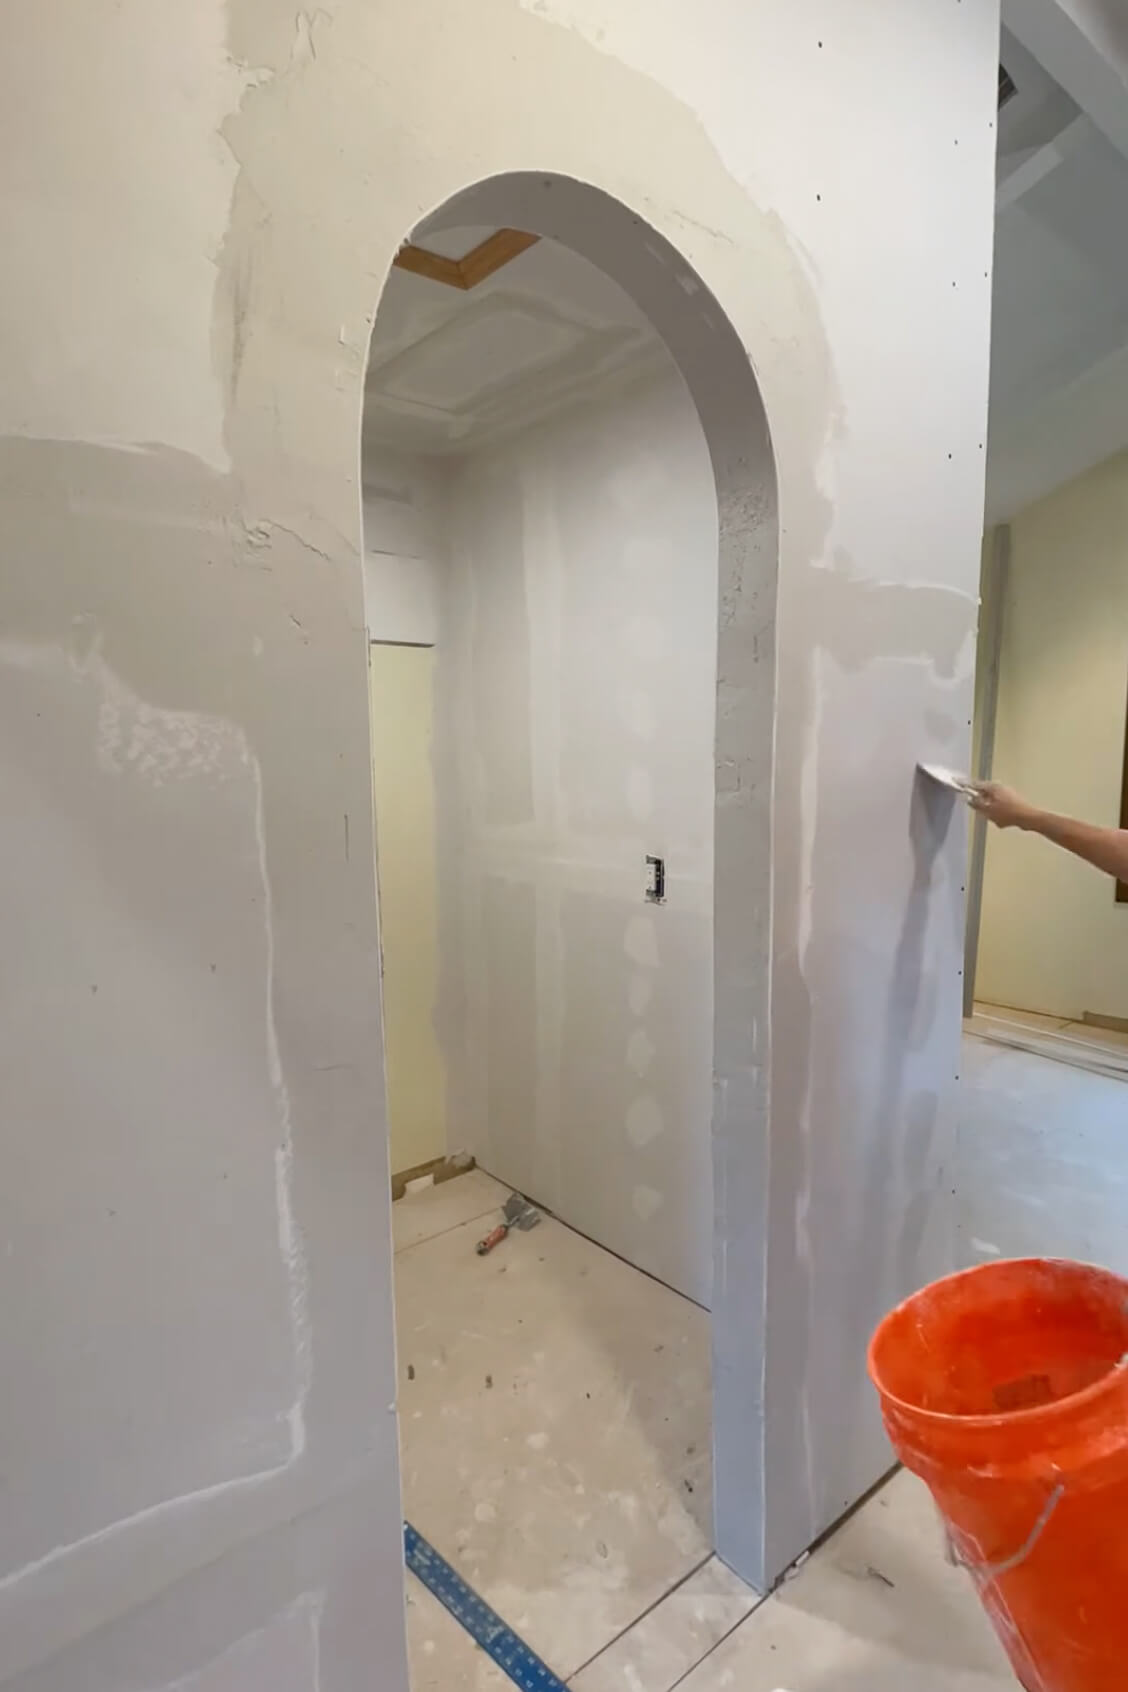 Finished drywall mud on an arched doorway.